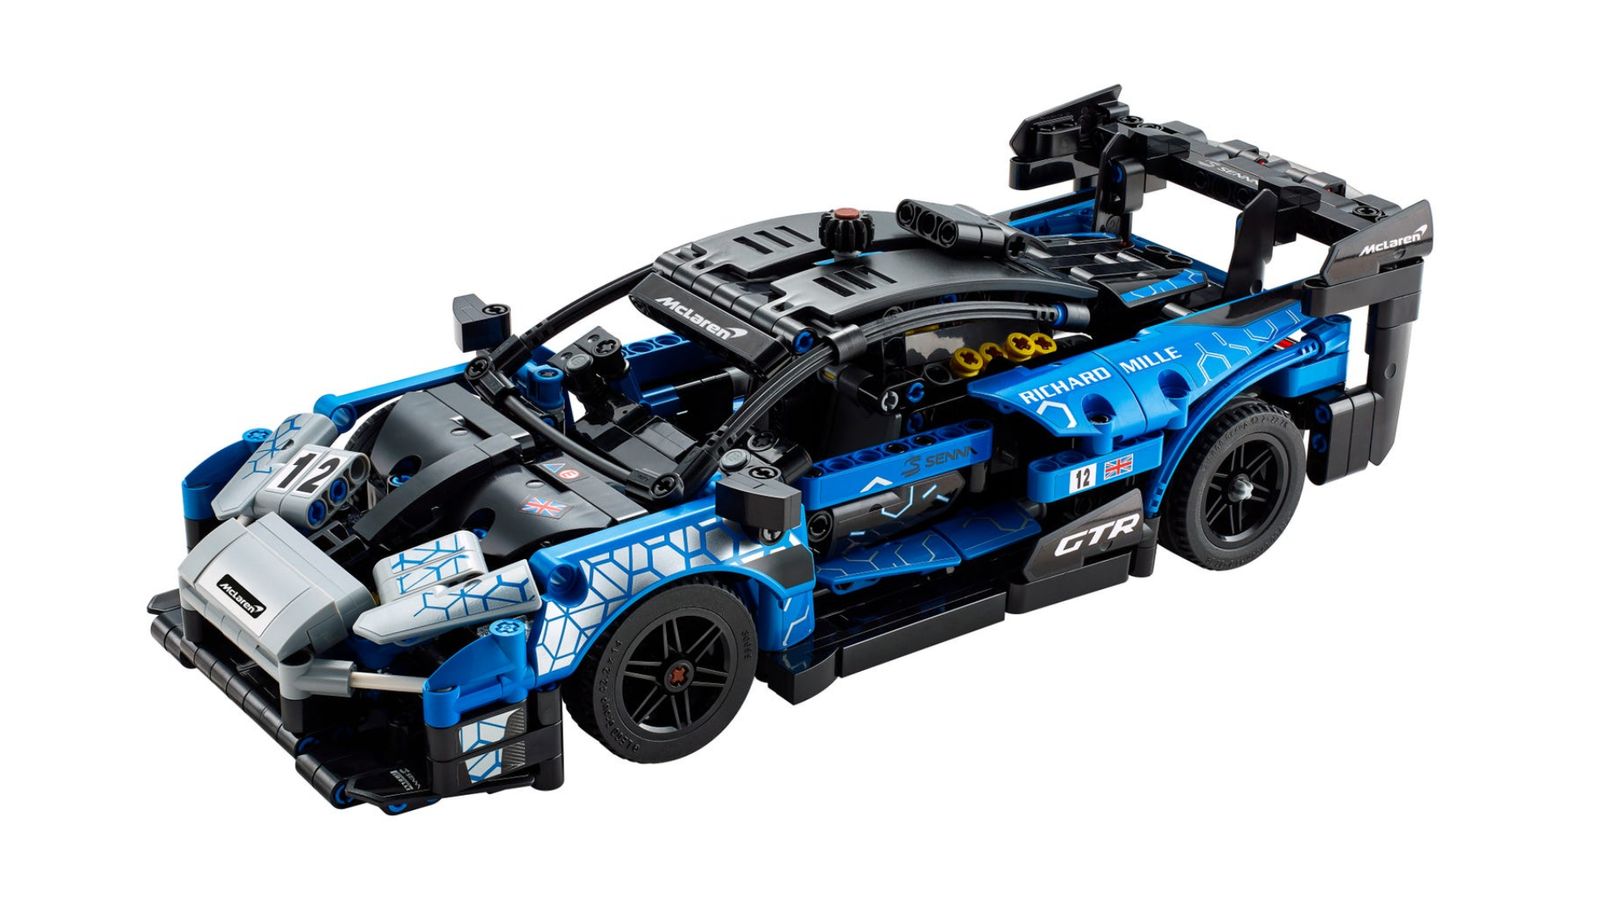 LEGO Technic McLaren Senna GTR Racing Sports product image of a blue and black racing car with sponsors.